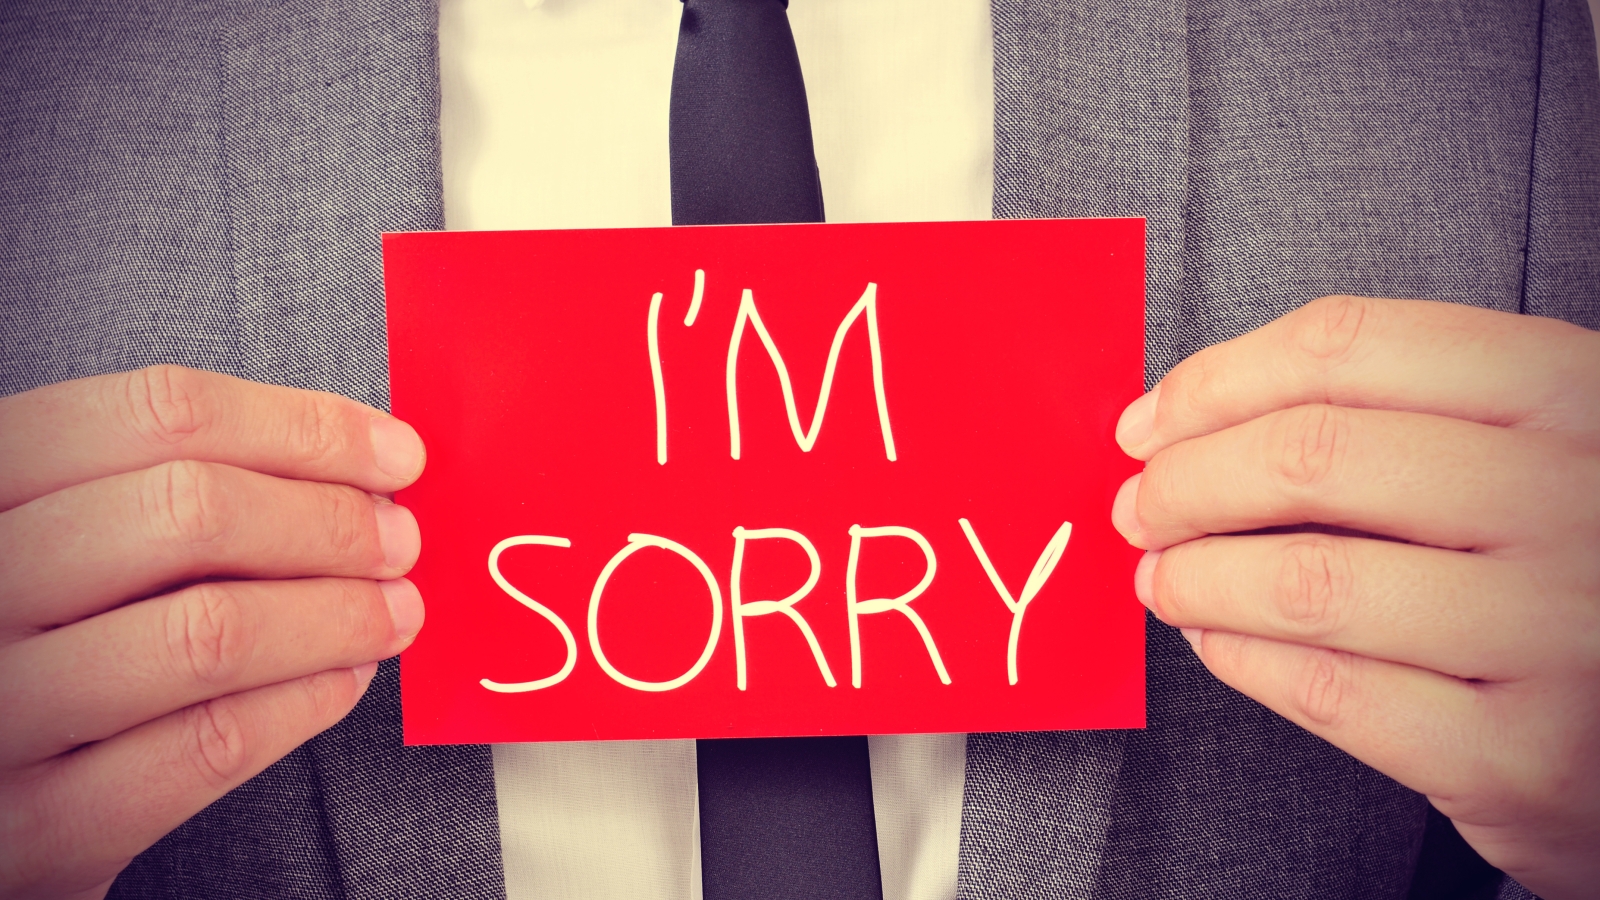 ‘Mean Time Before CEO Apologises’ Is The Ultimate Security Metric